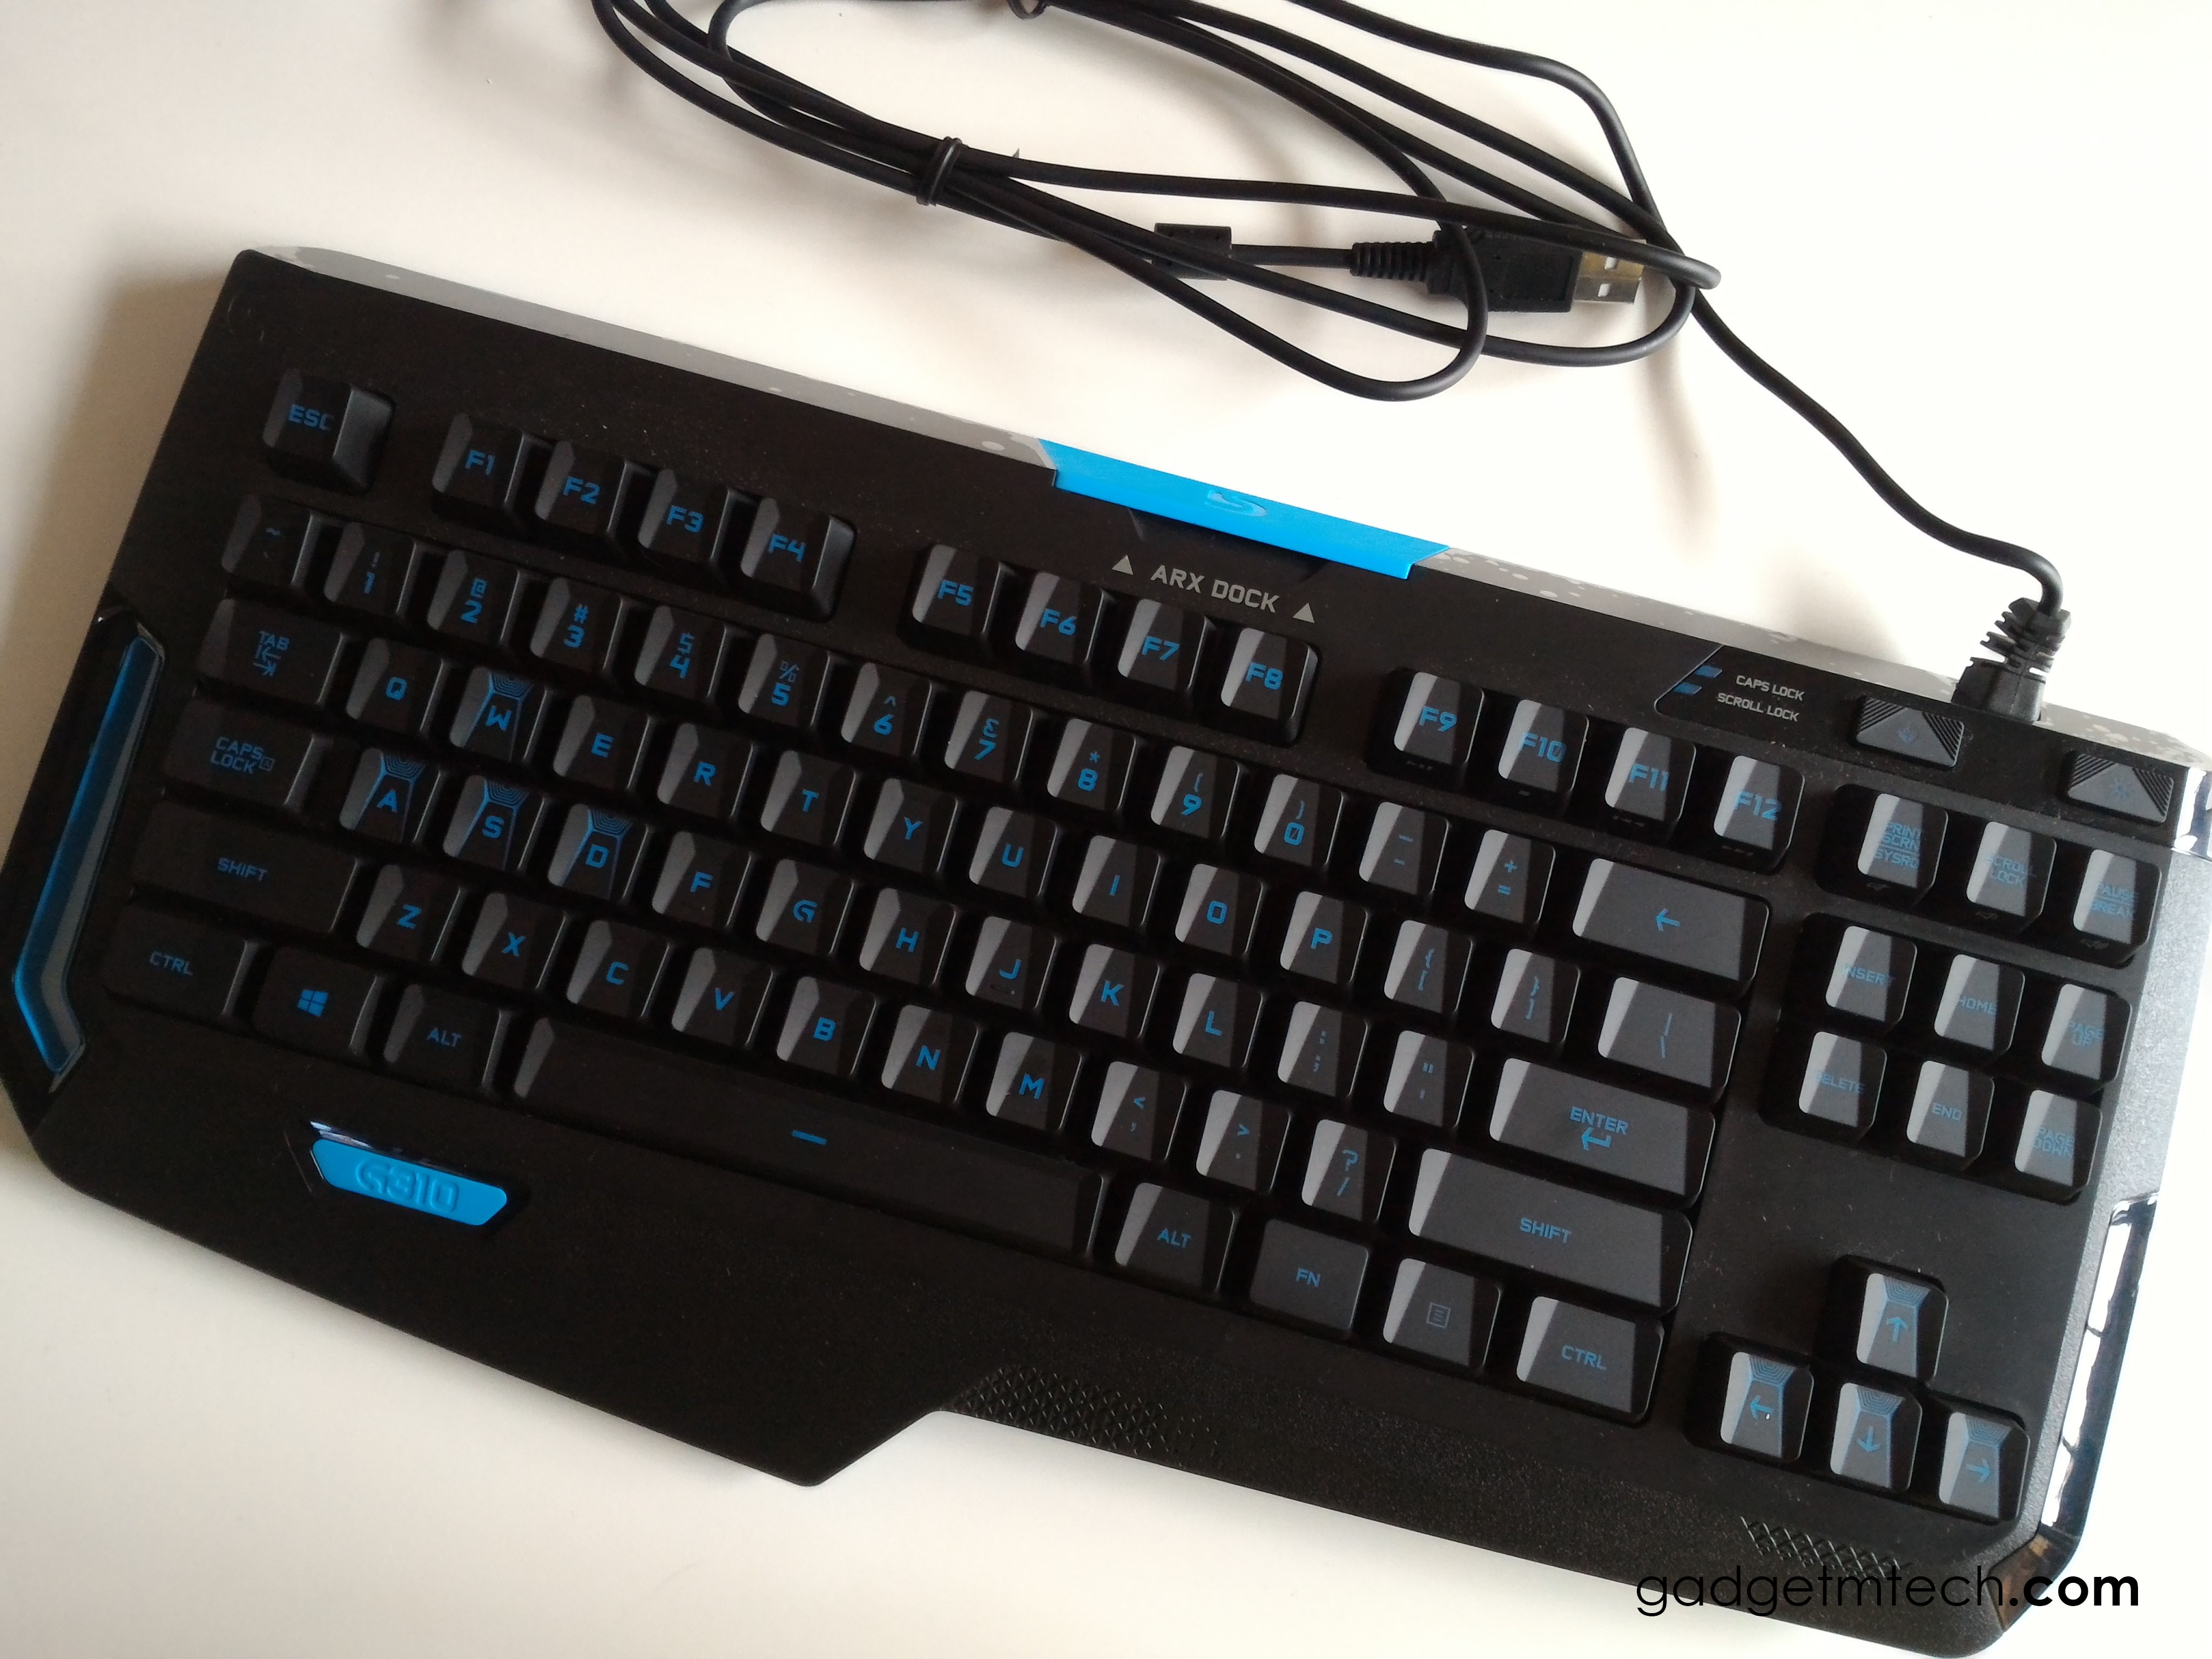 Logitech G310 Atlas Dawn Review: Gaming Goes Compact